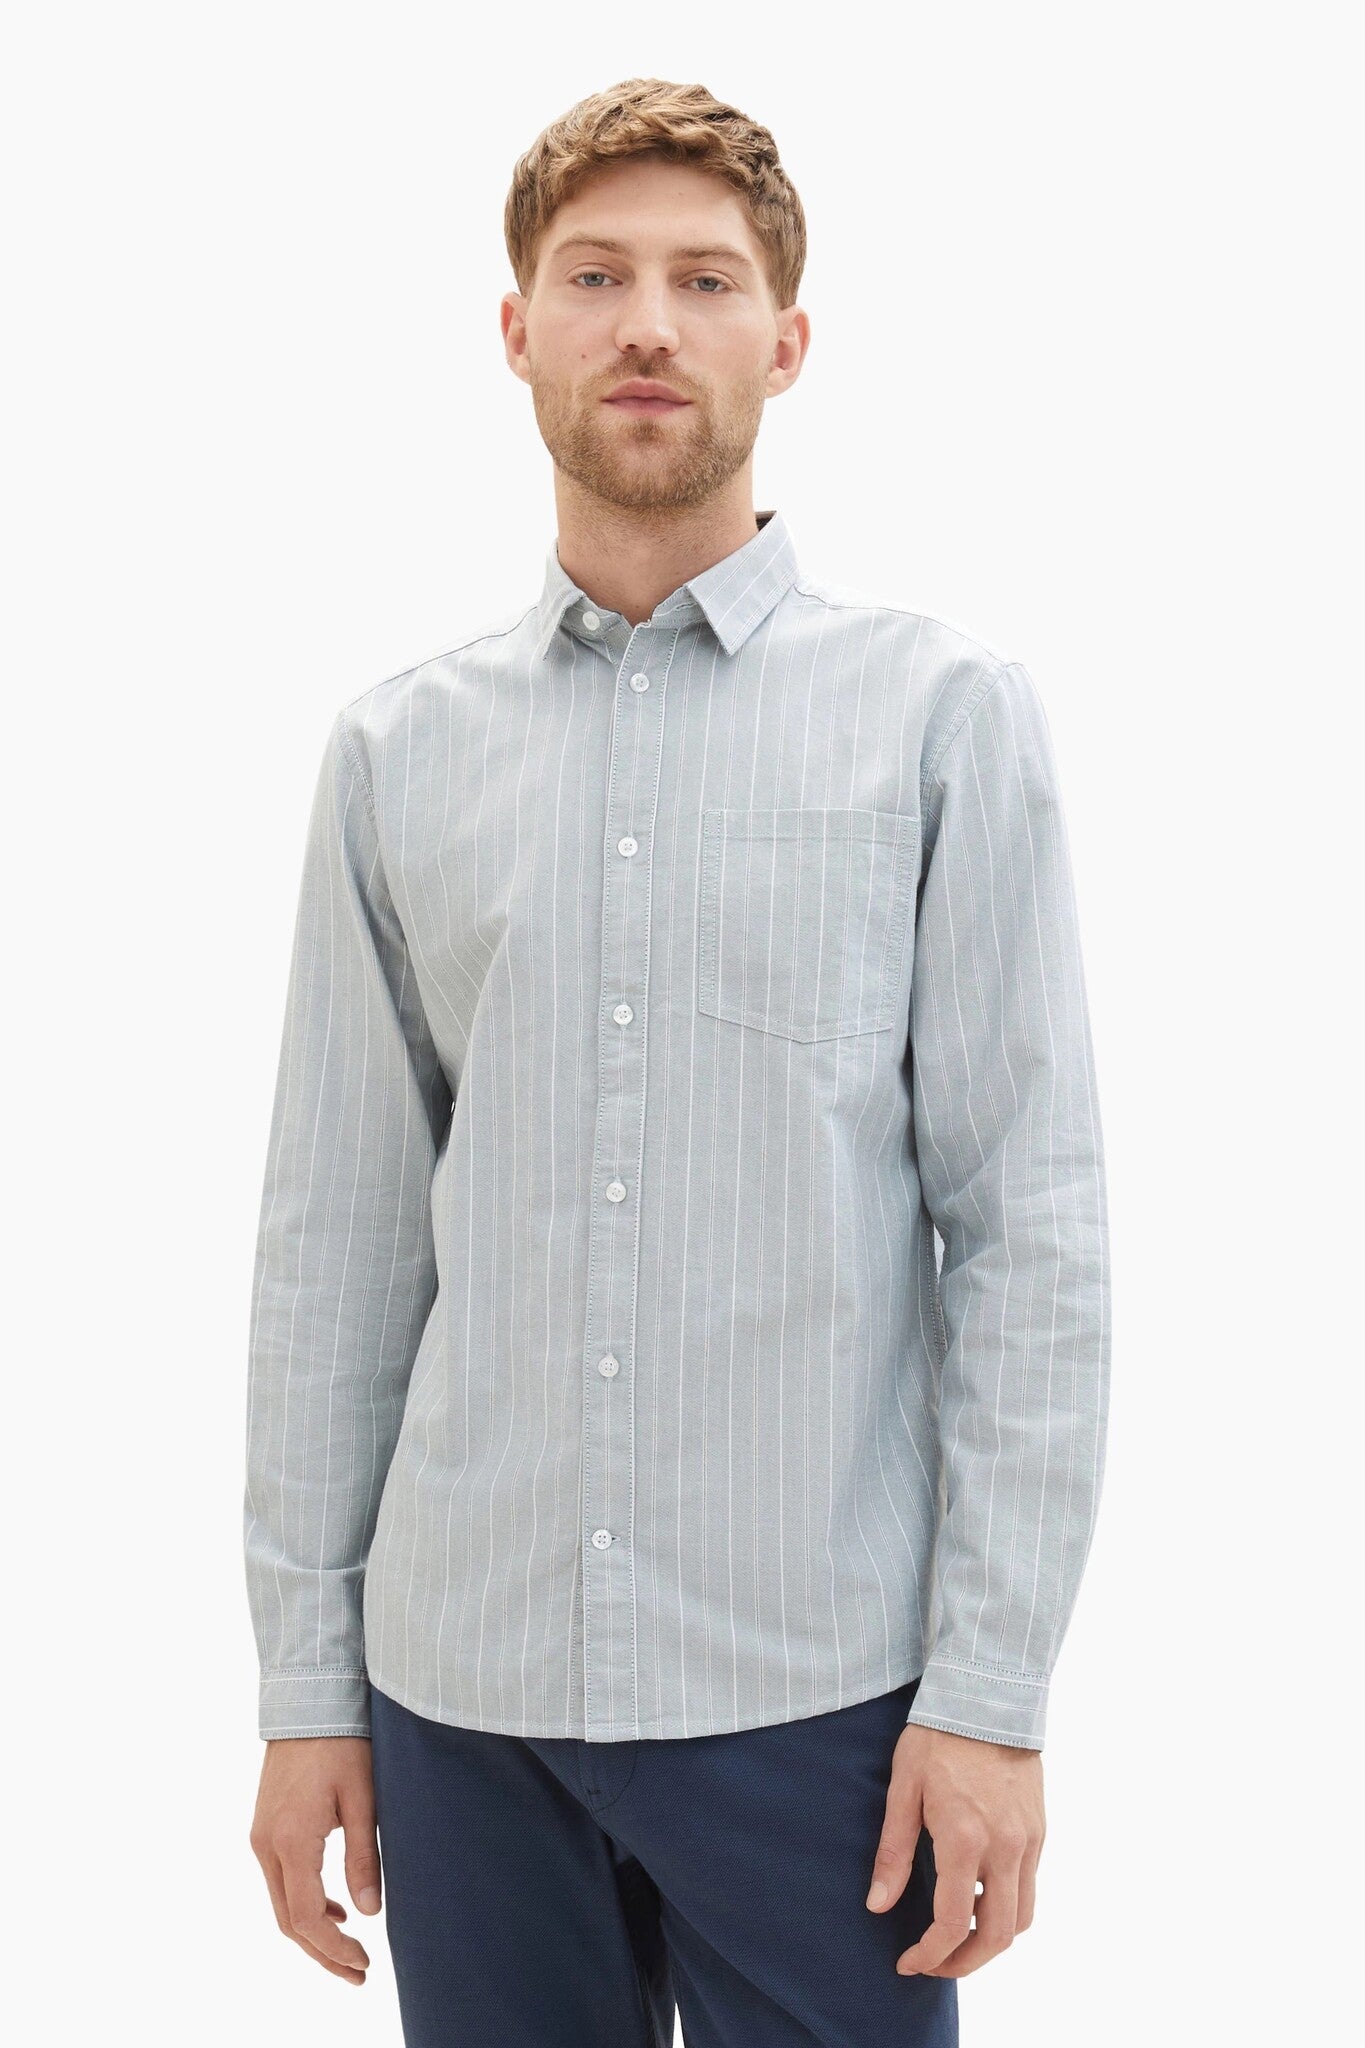 Tom Tailor Grey Lined Shirt